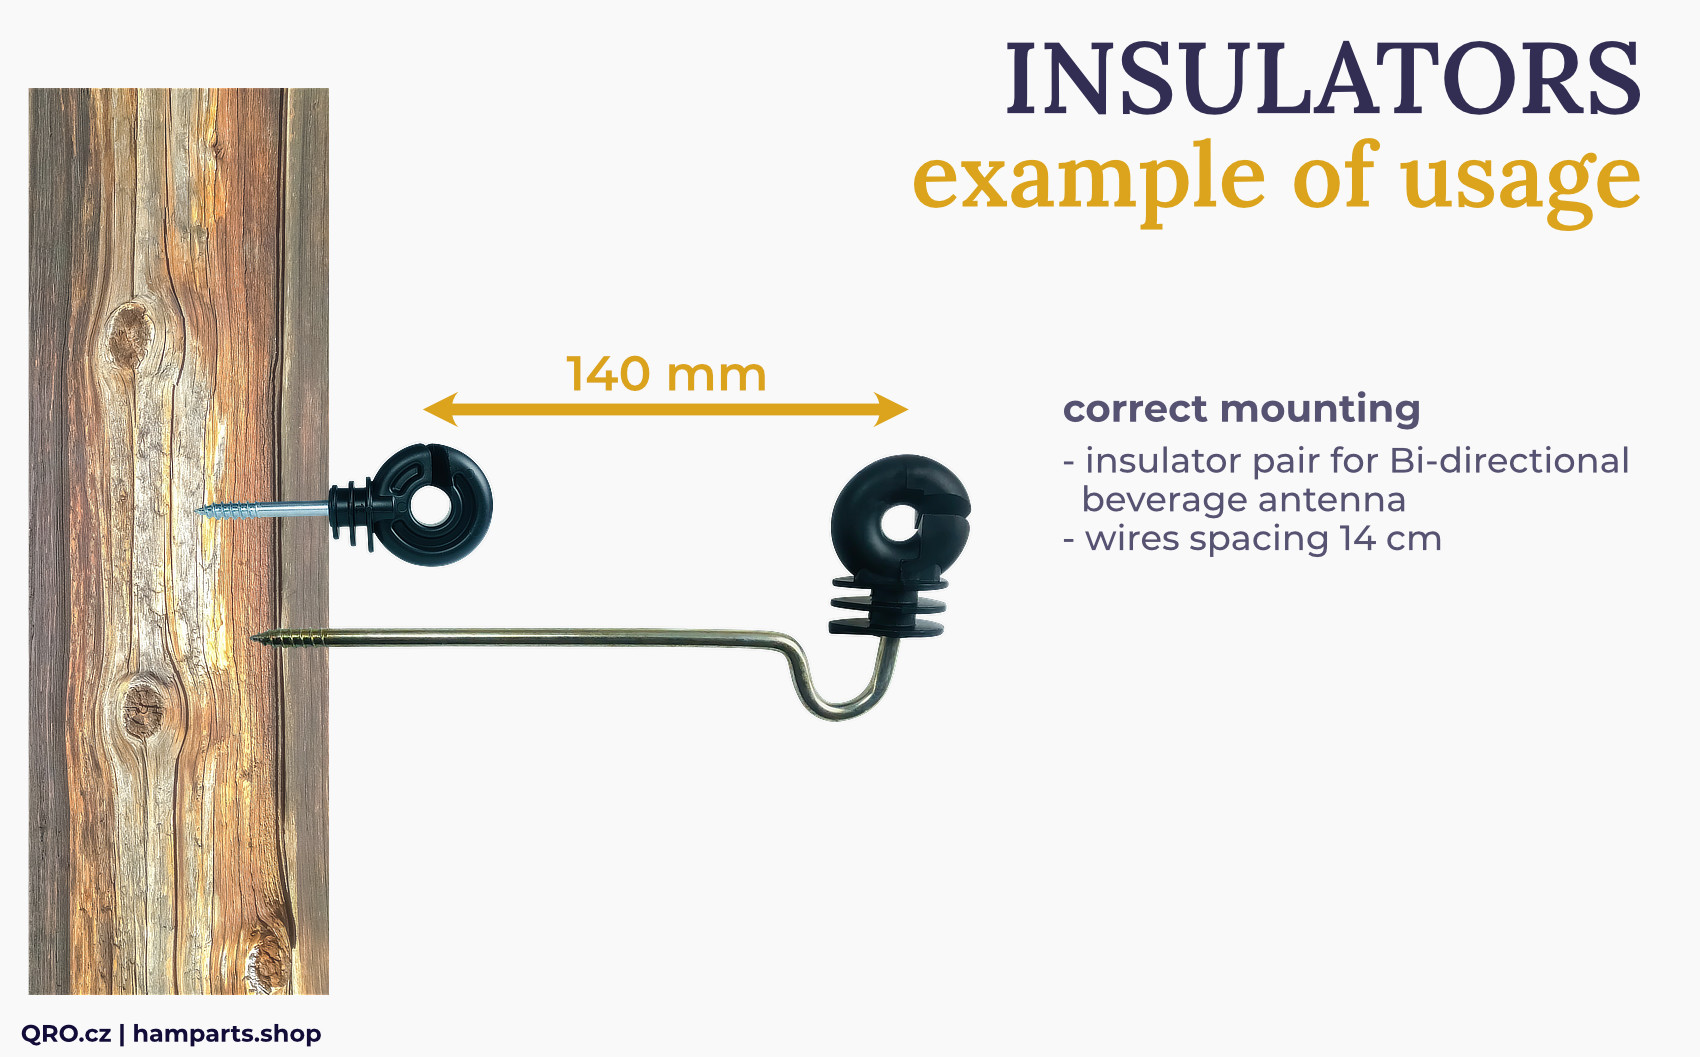 example of usage of the insulator for wire antenna by qro.cz hampart.shop